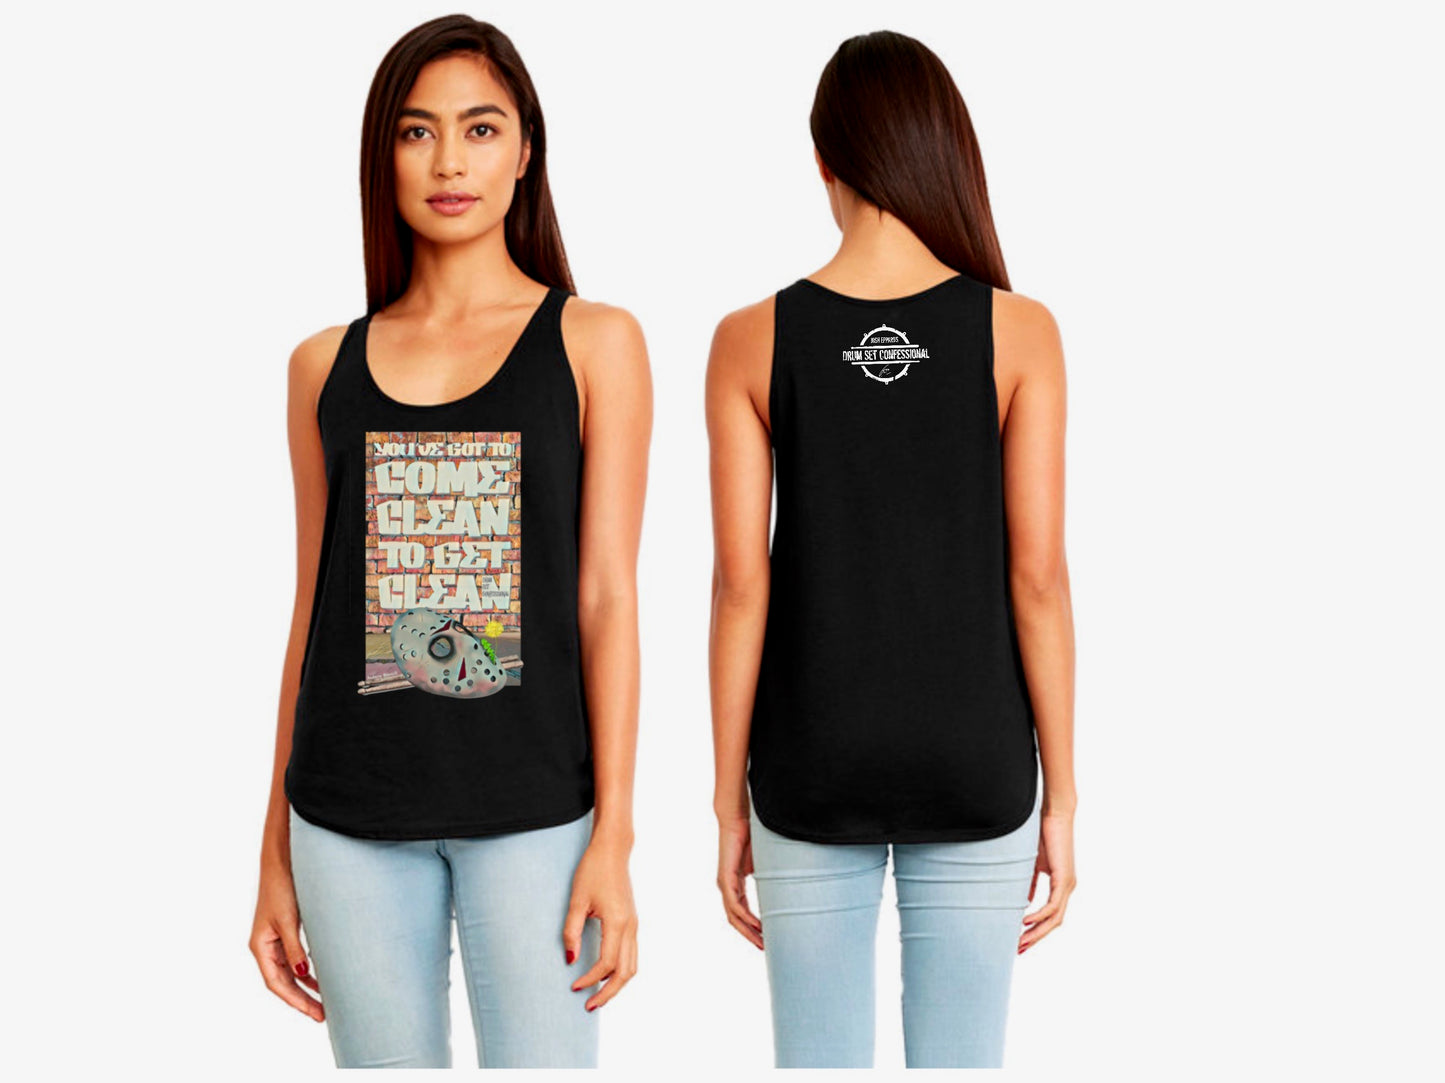 DSC "Mask" Black Next Level Apparel Ladies' Festival Tank (100% of profits fuel outreach and donations to addiction/recovery causes.)